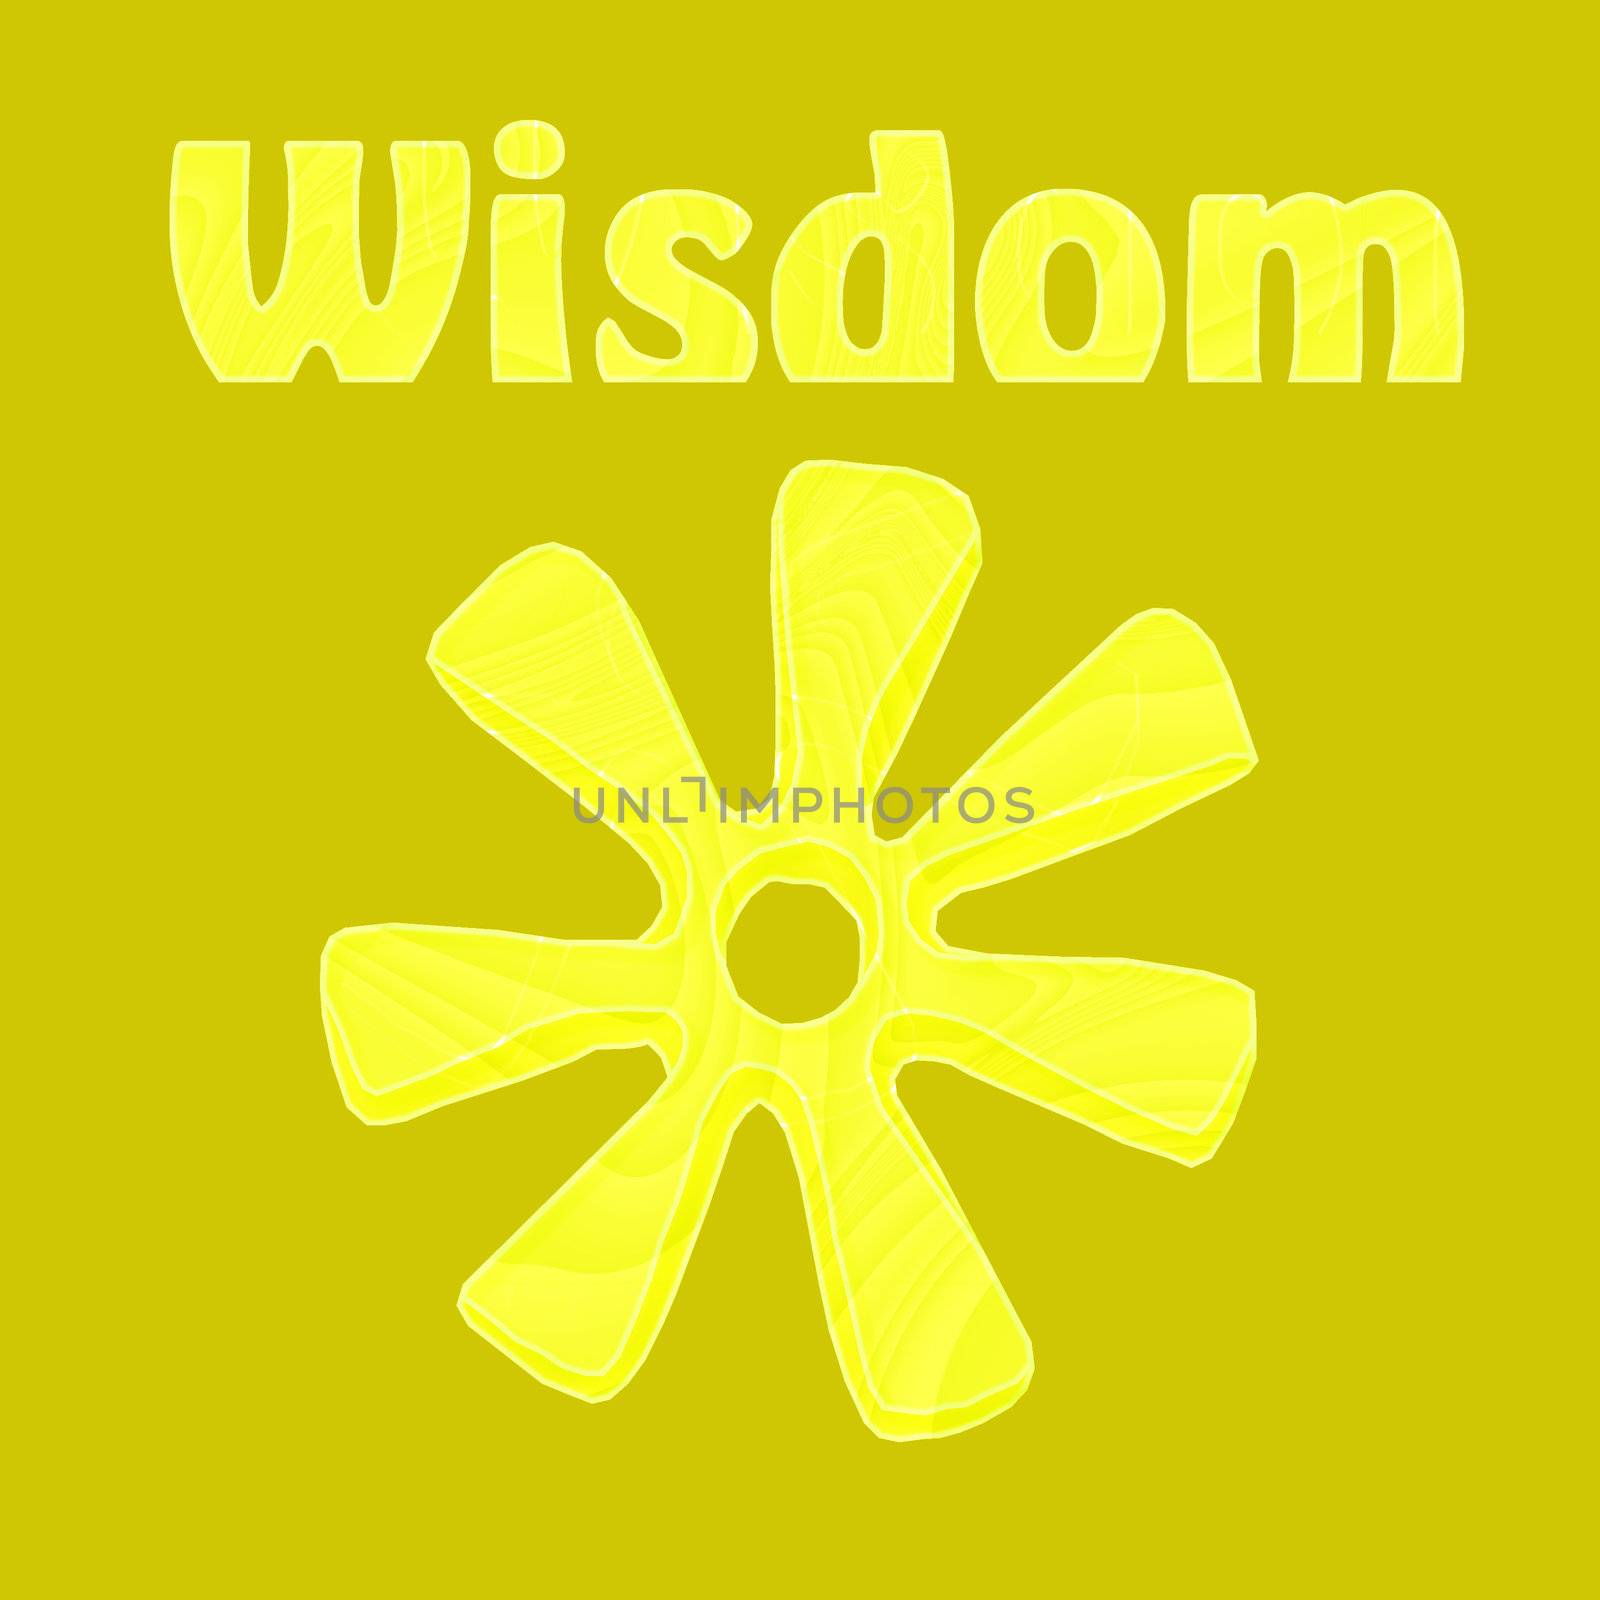 Wisdom illustrated by the African symbol of ananse ntontan in yellow - a raster illustration.